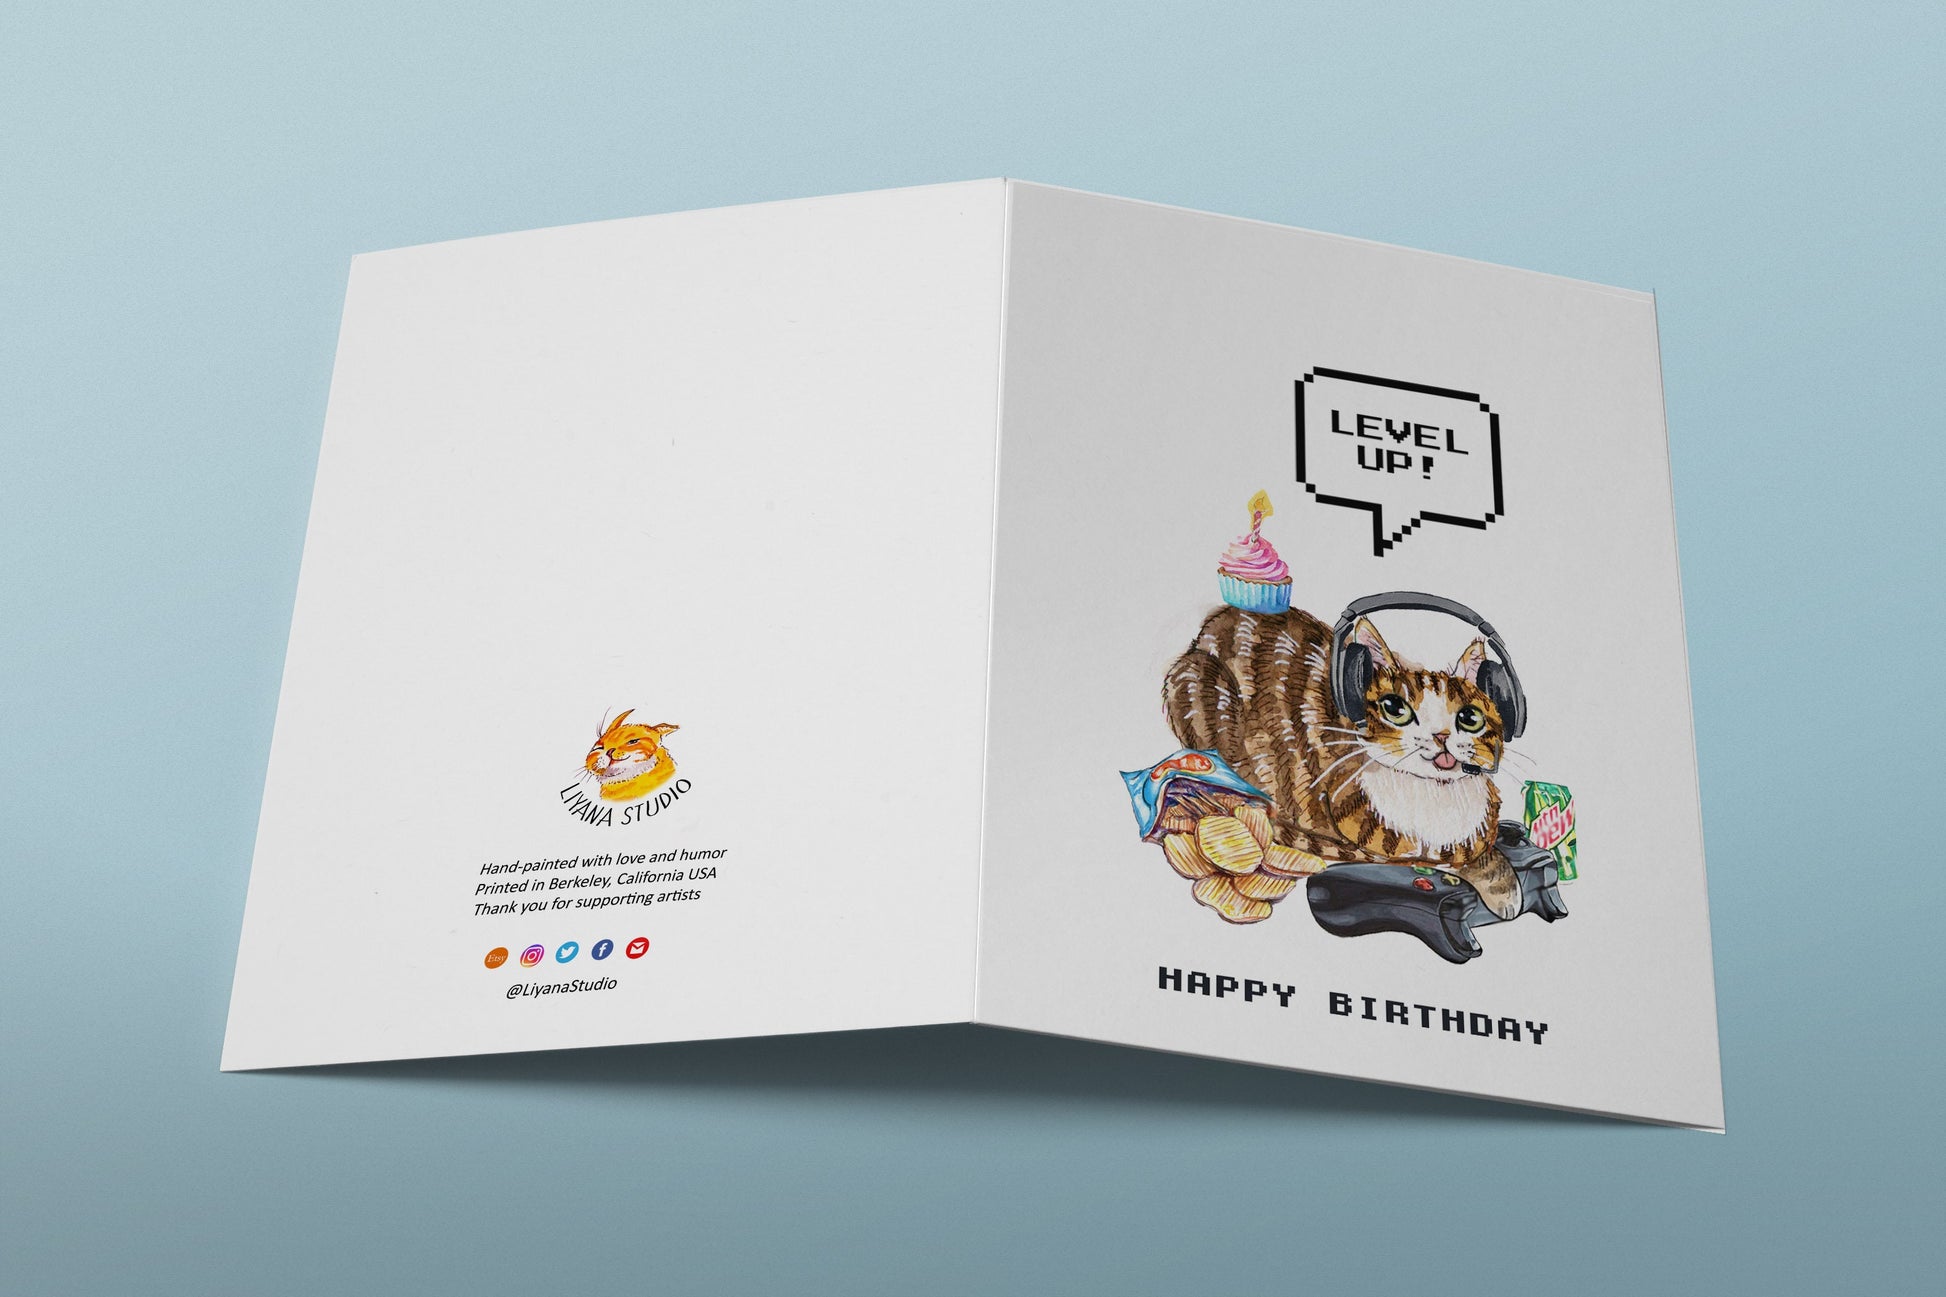 Cat Gamer Happy Birthday Cards For Boyfriend - Video Games Level Up